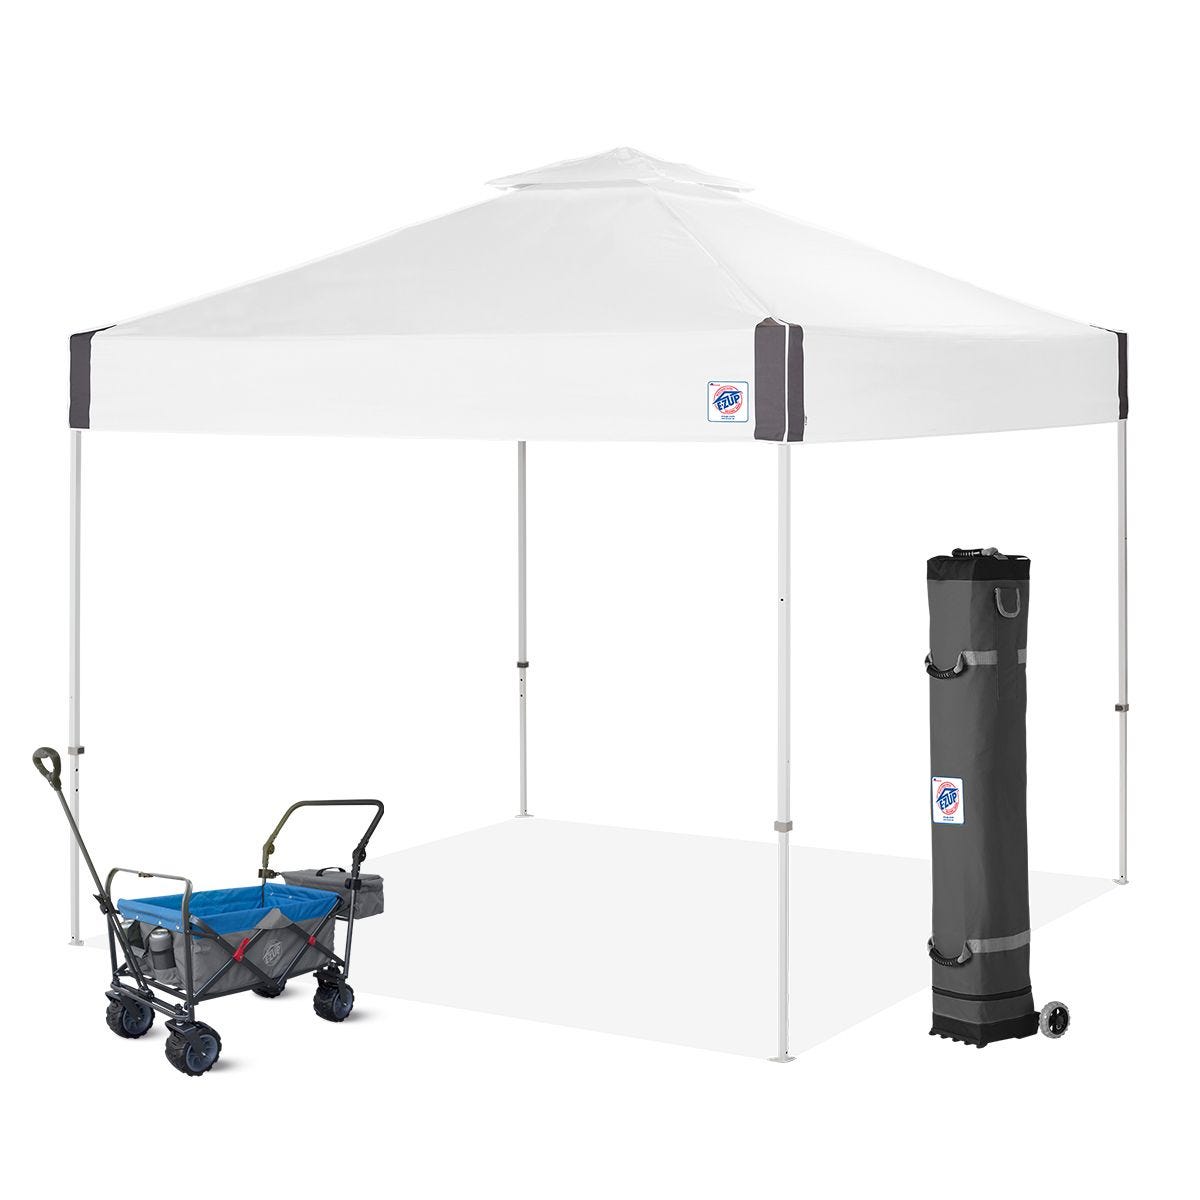 Pyramid™ Vented Canopy & GearRunner™ Wagon Bundle